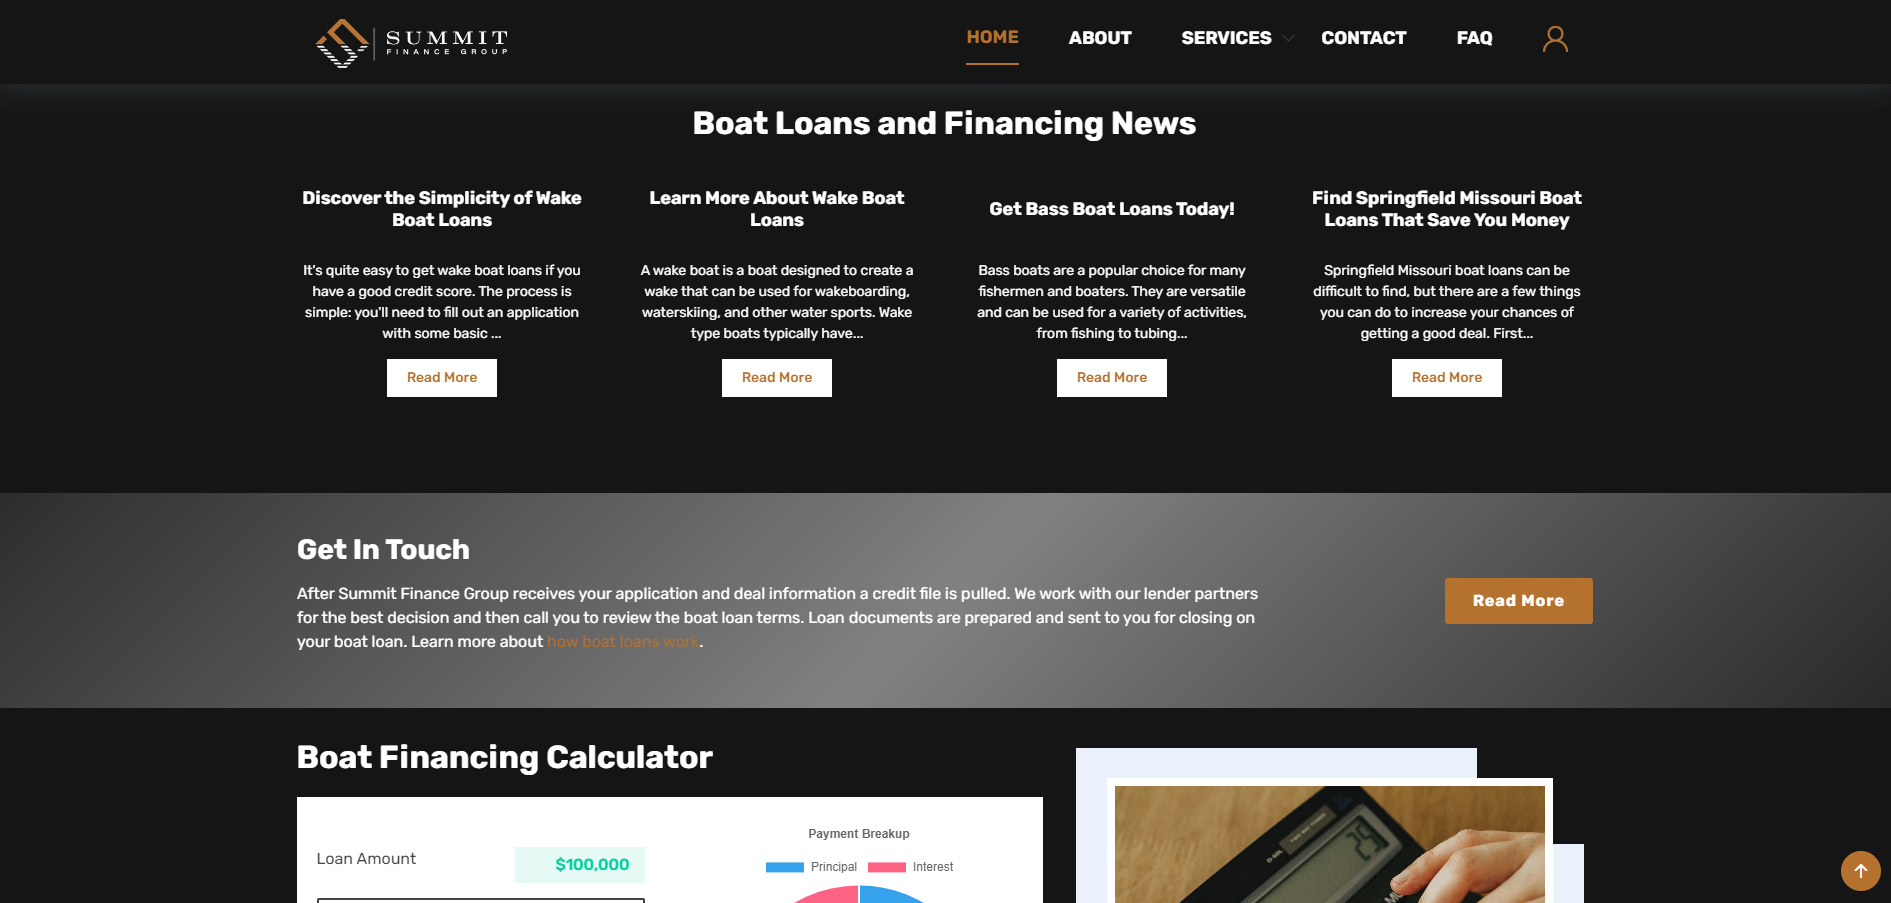 Website marketing and design for Summit Finance Group